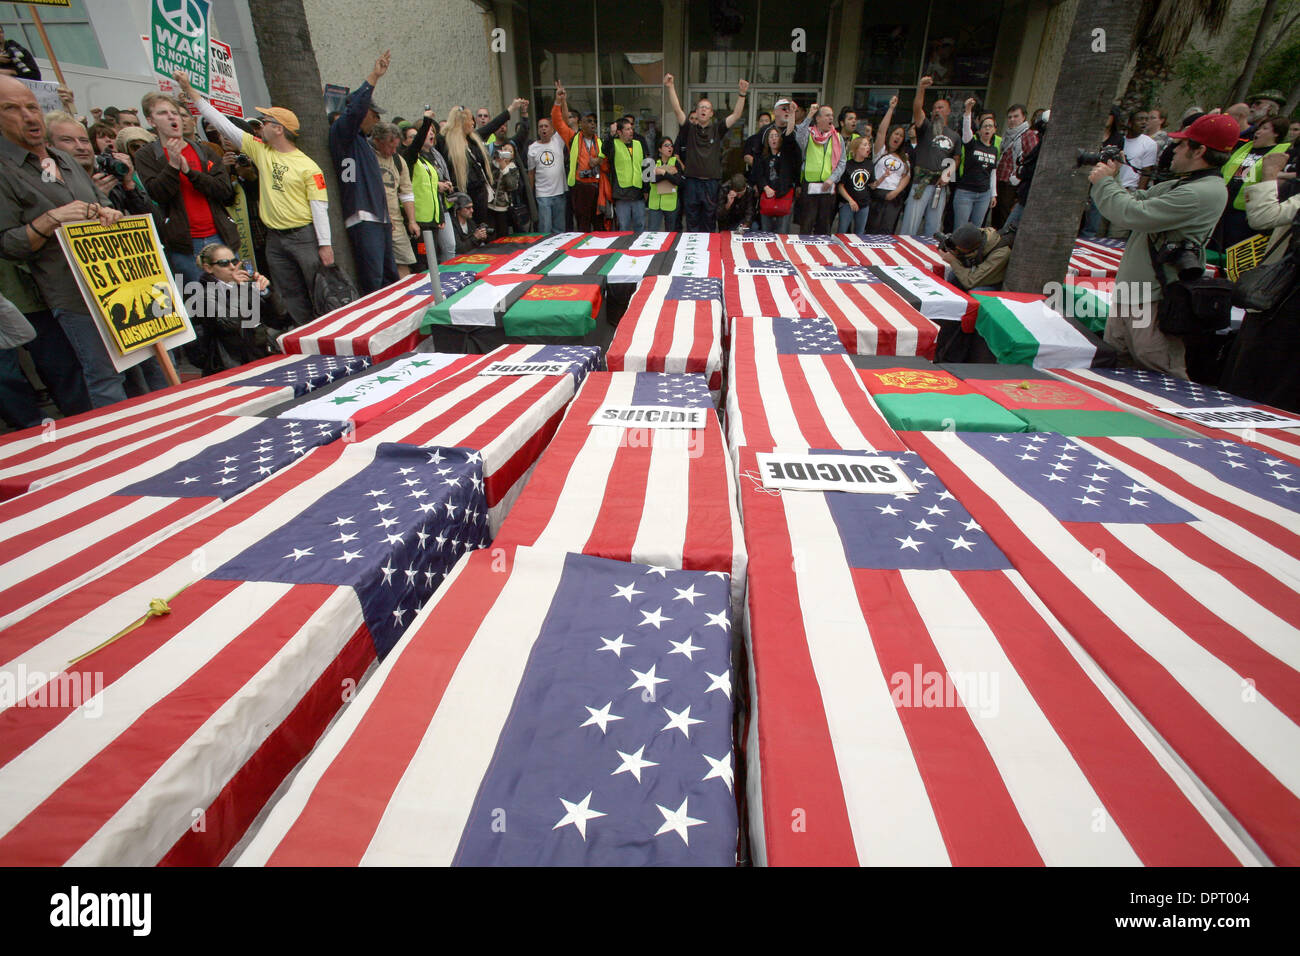 Mar 21, 2009 - Hollywood, California, USA - Anti-war activists place the mock coffins to the front door of the Armed Forces Recruitment Center during a march in Hollywood to protest the 6th anniversary of the US war in Iraq, March 21, 2009. (Credit Image: © Ringo Chiu/ZUMA Press) Stock Photo